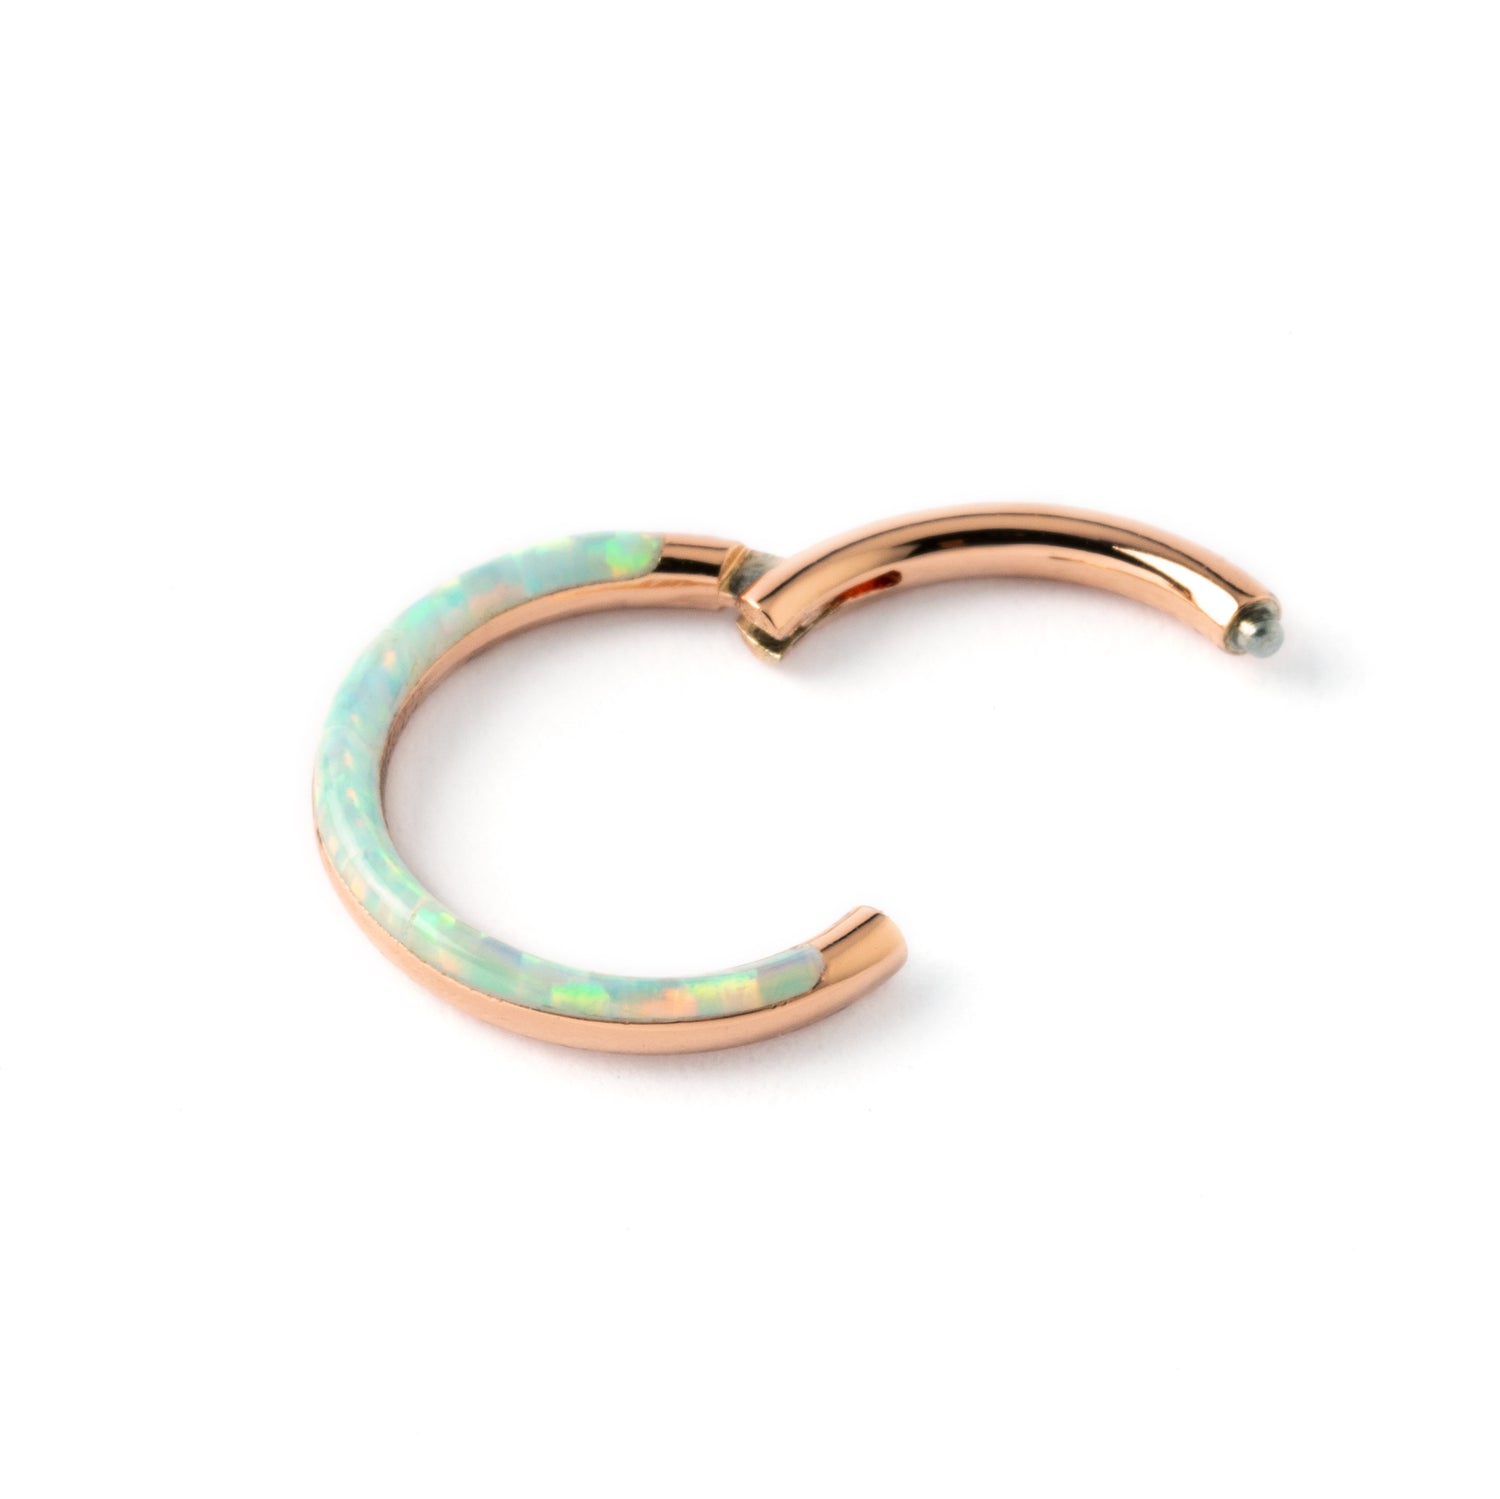 Rose Gold surgical steel septum clicker ring with white opal inlay closure view